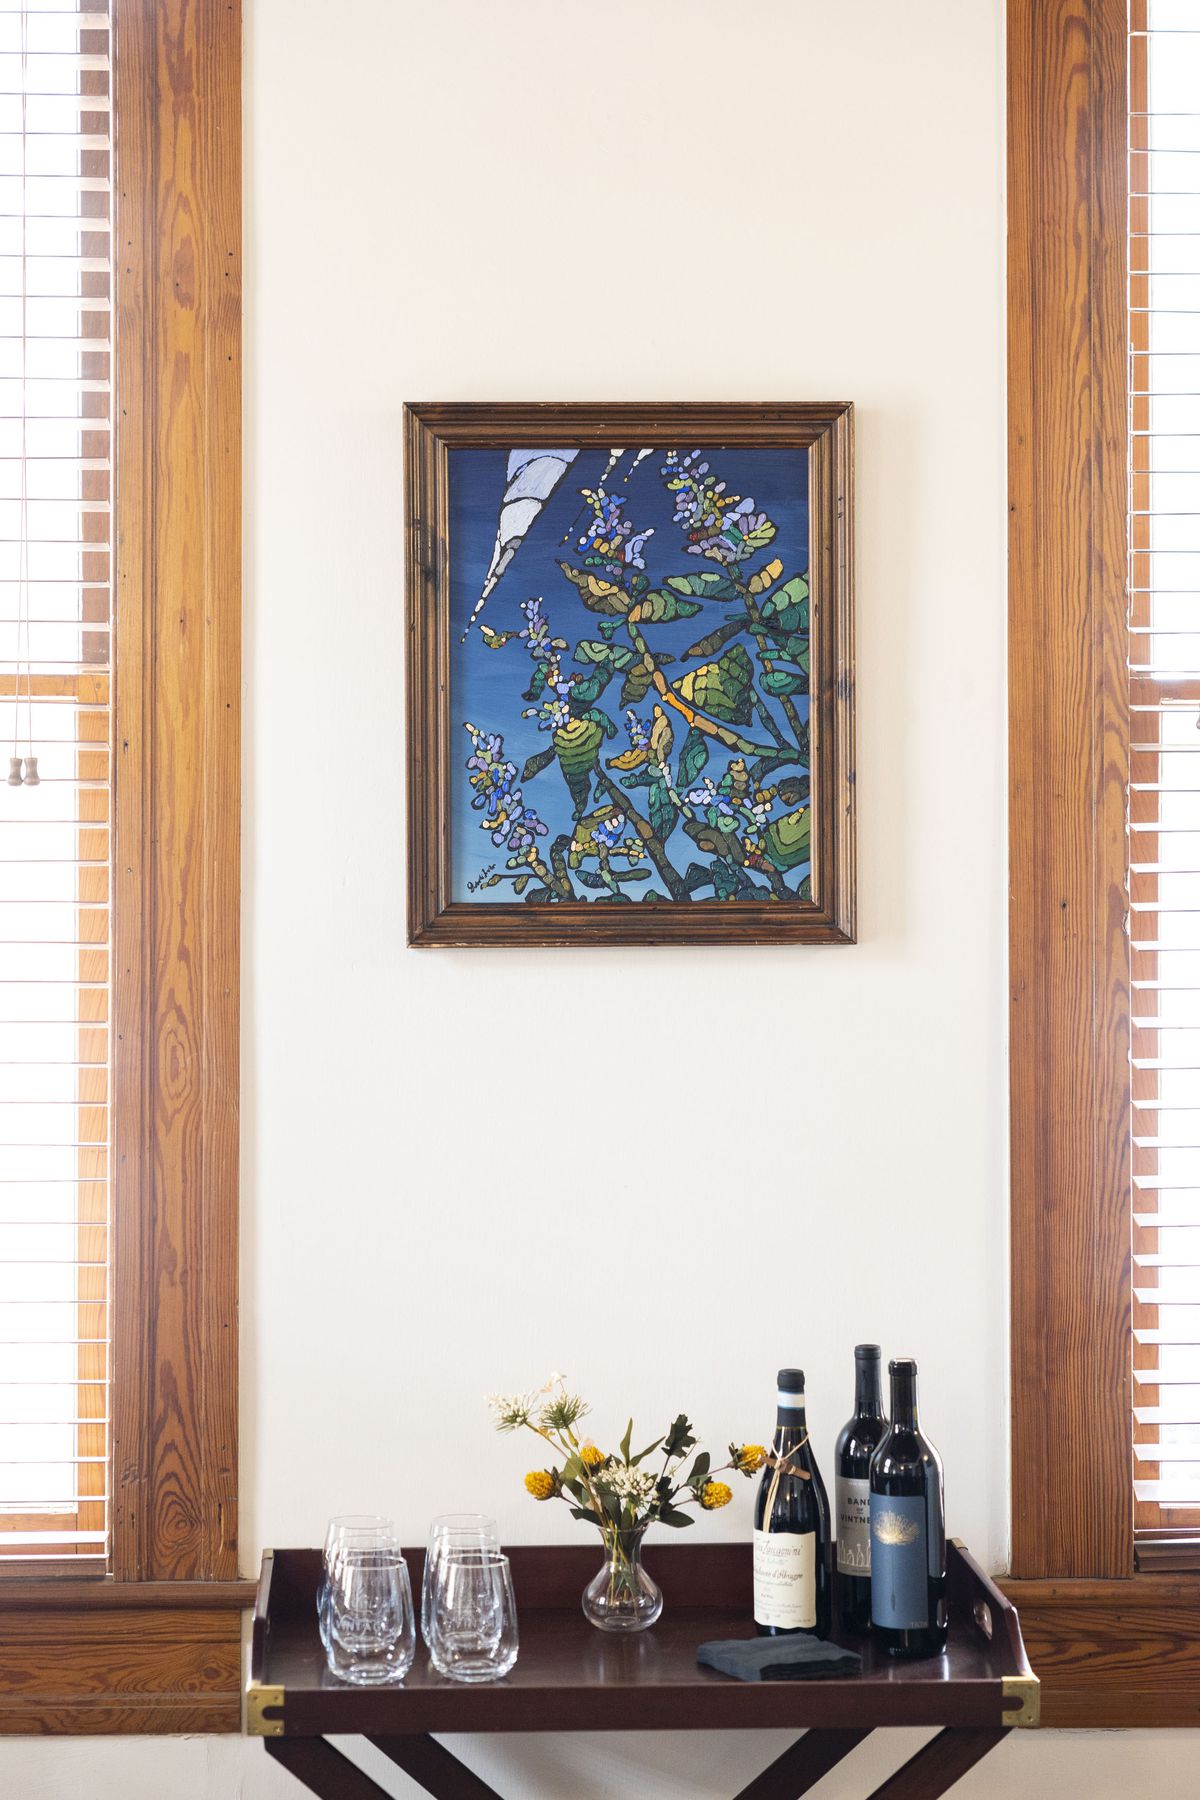 A wall with a painting and a table of stemless wine glasses and wine bottles.